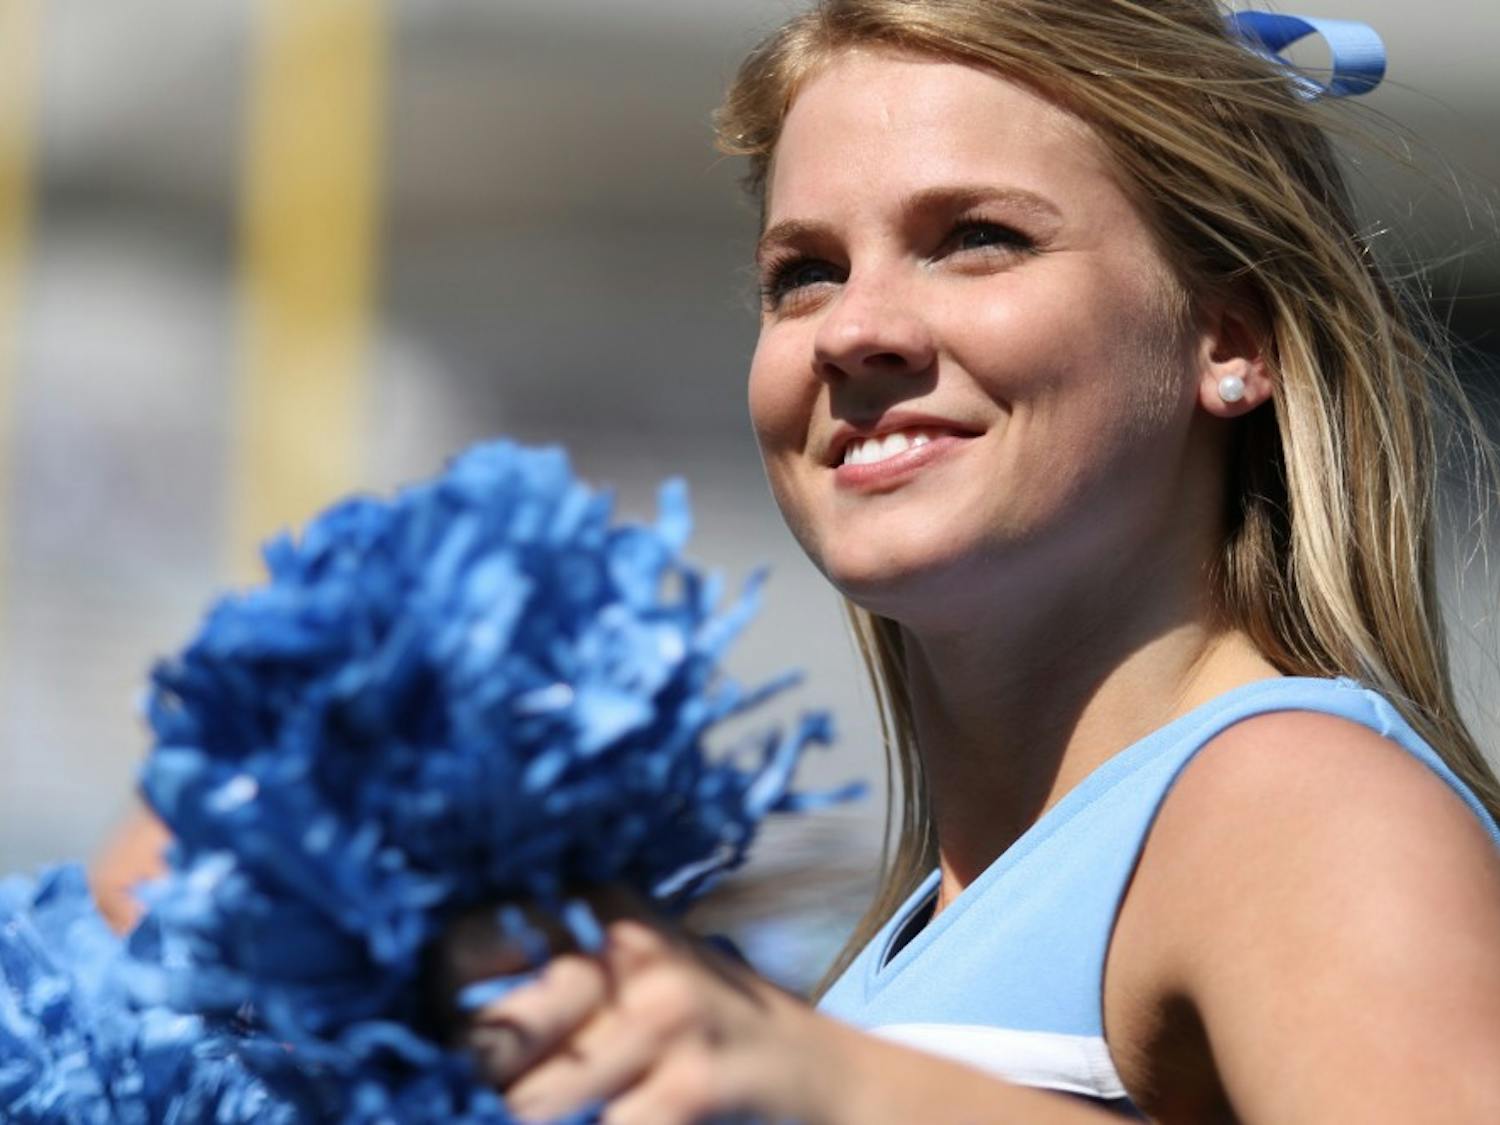 UNC hosted its annual spring football game on Saturday, April 14 at Kenan Stadium. 